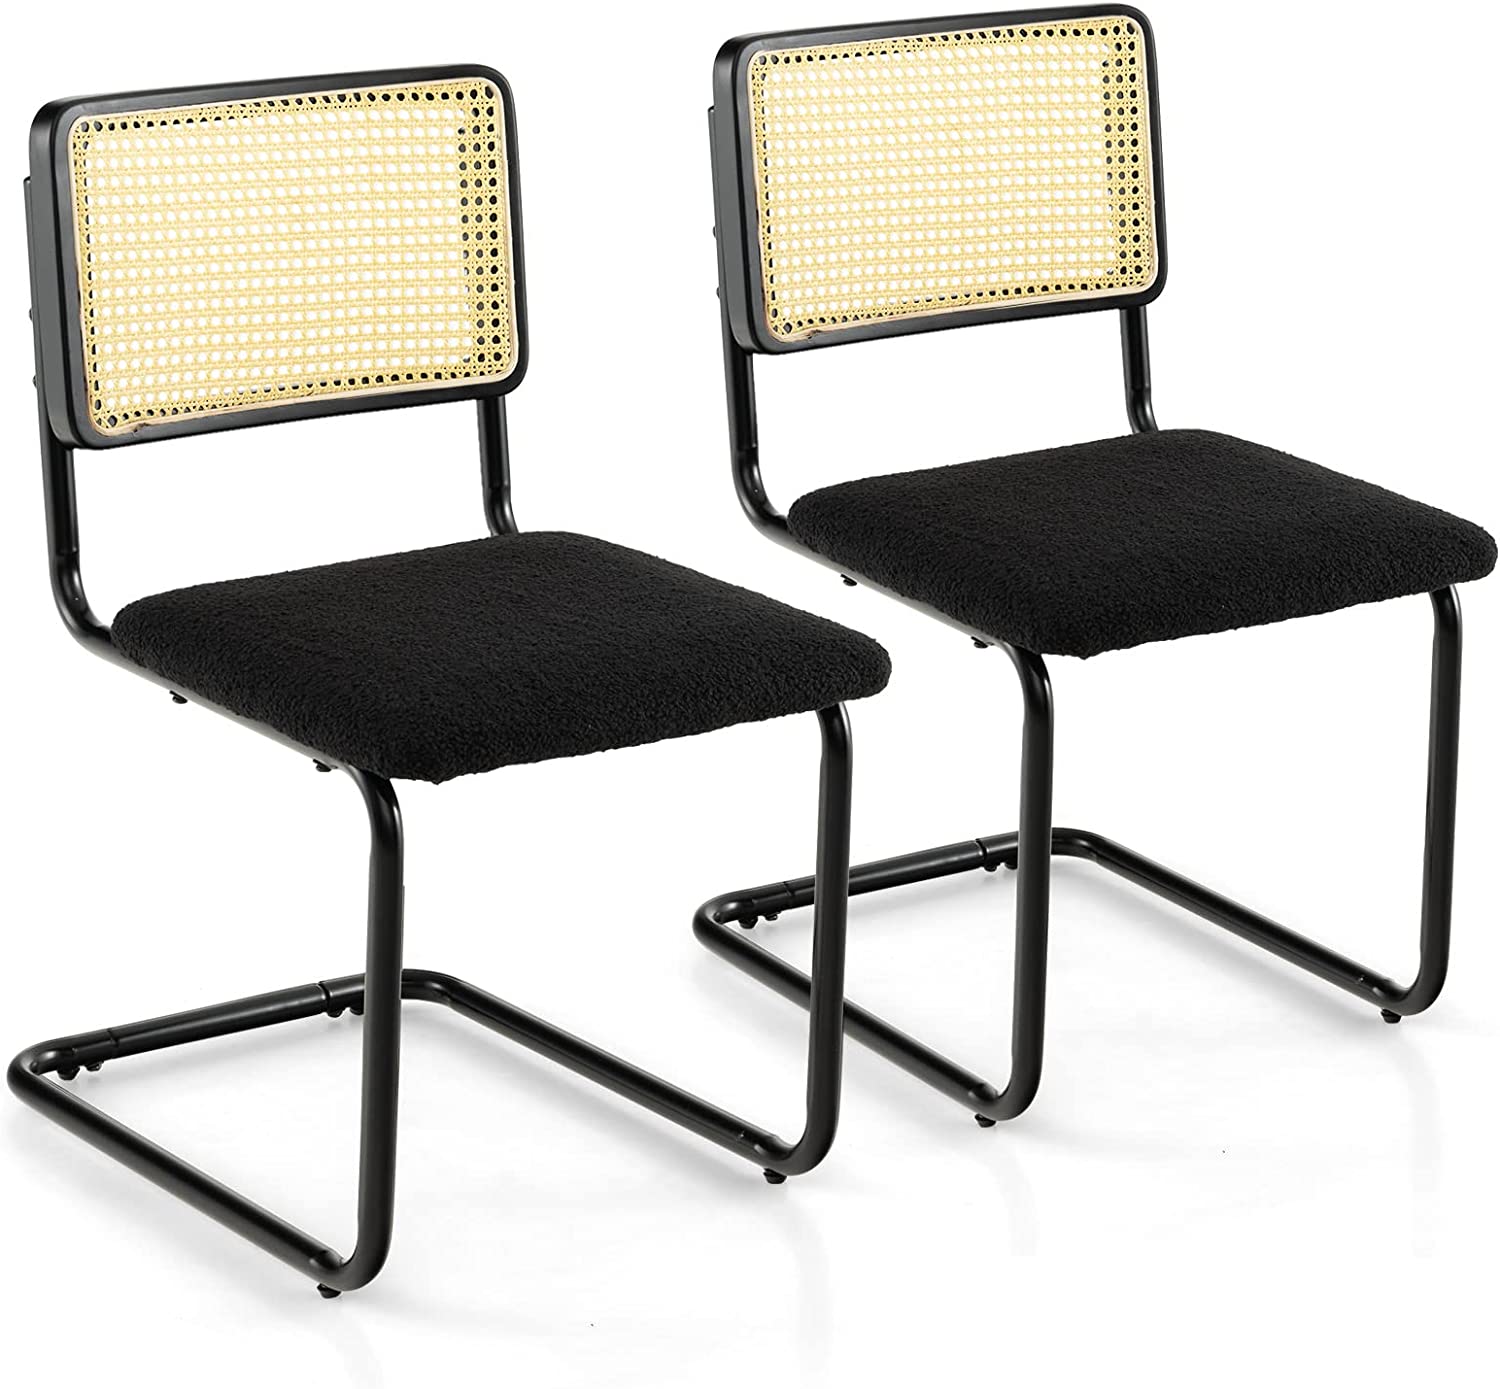 Giantex Rattan Dining Chairs Set of 2 or 4 - Upholstered Modern Mid-Century Kitchen Chair with Mesh Backrest